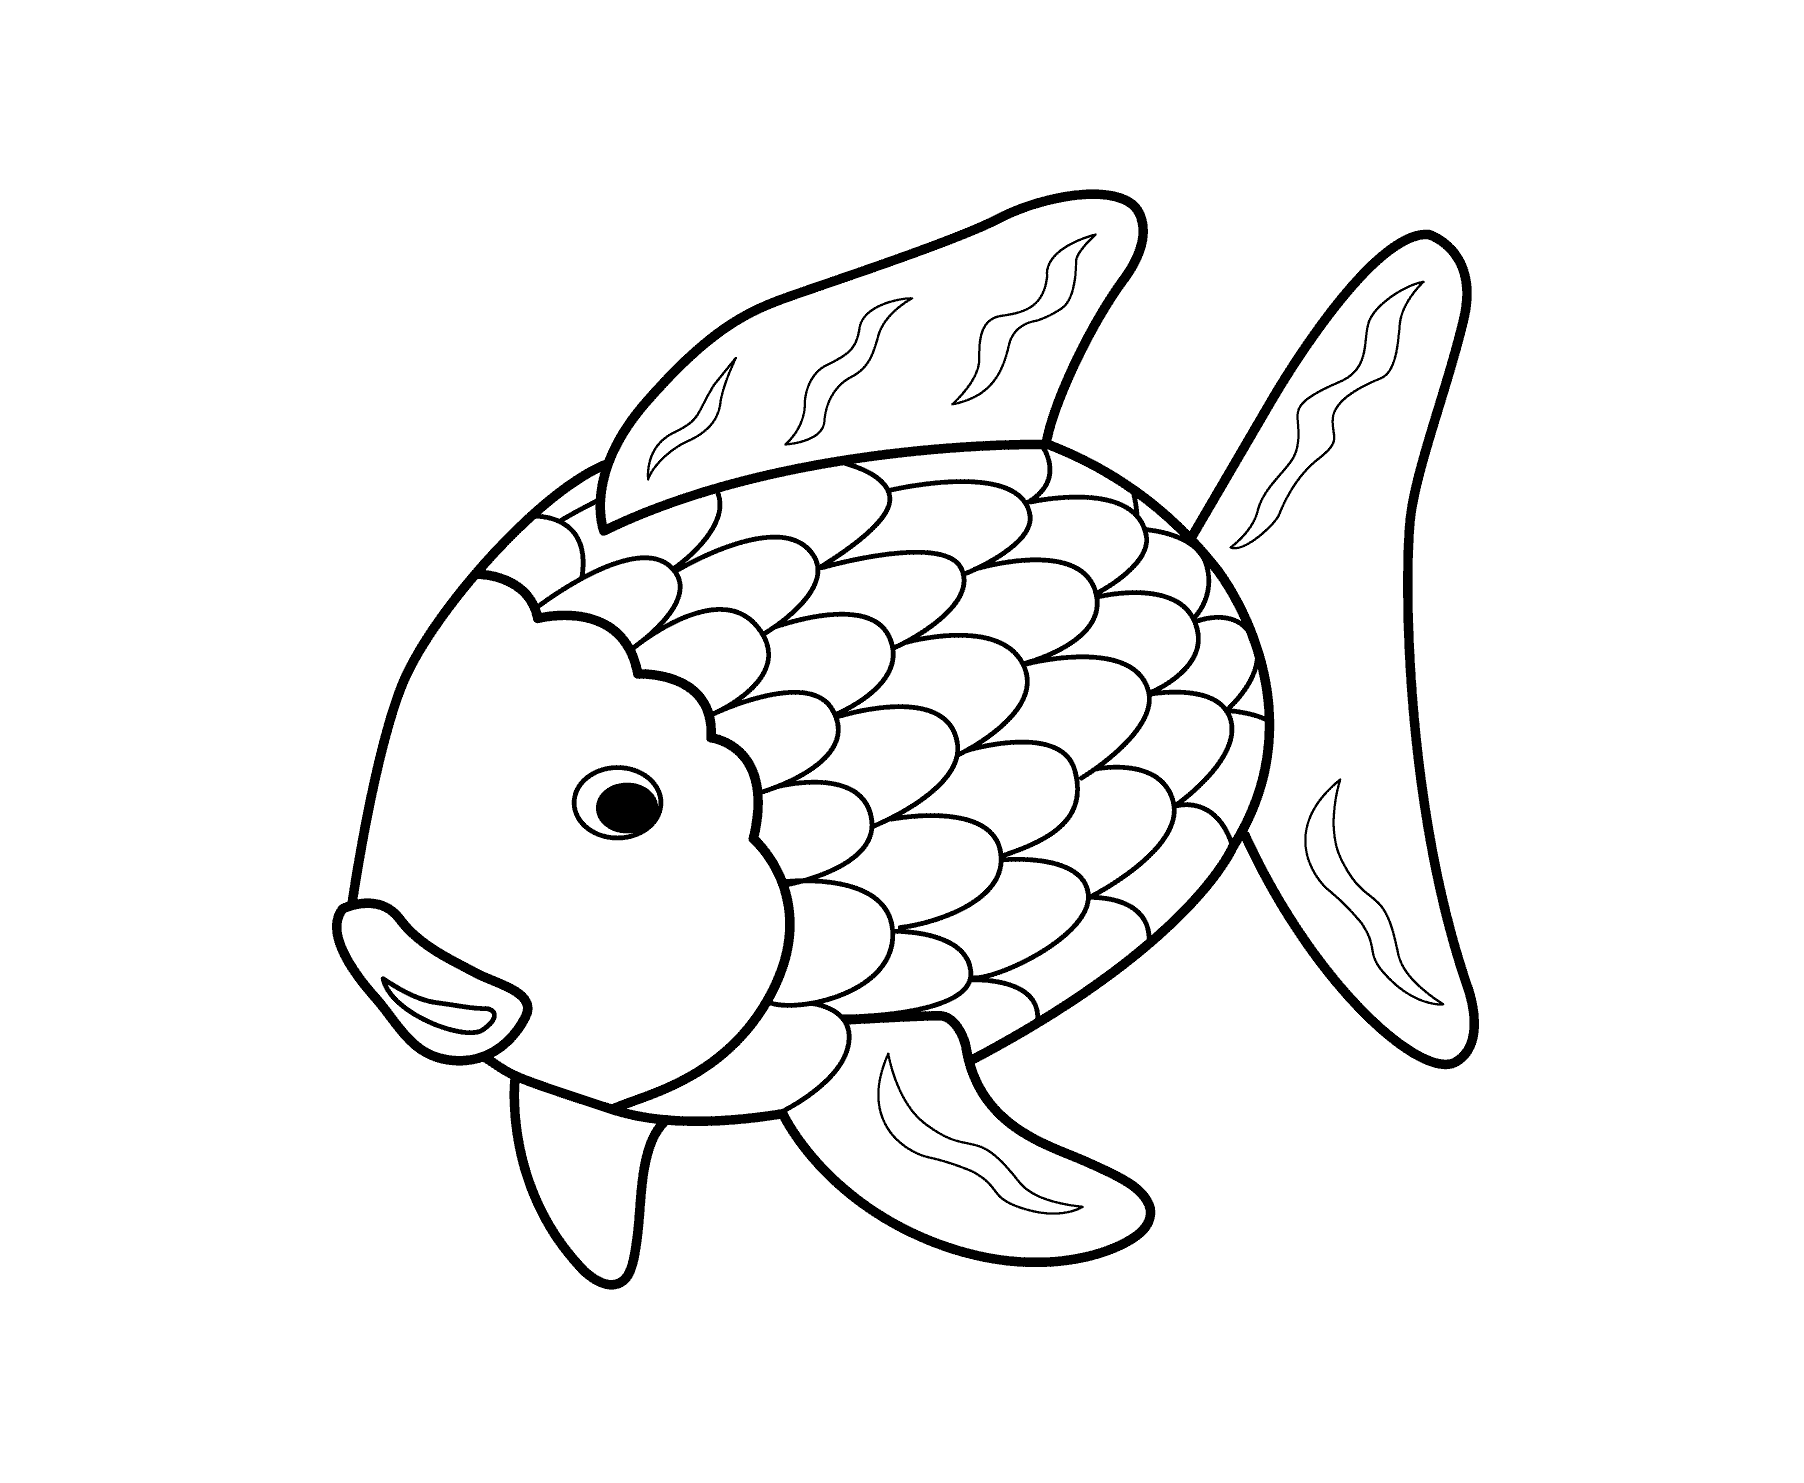 Fish And Sea Animals Coloring Pages Free Printable - VoteForVerde.com